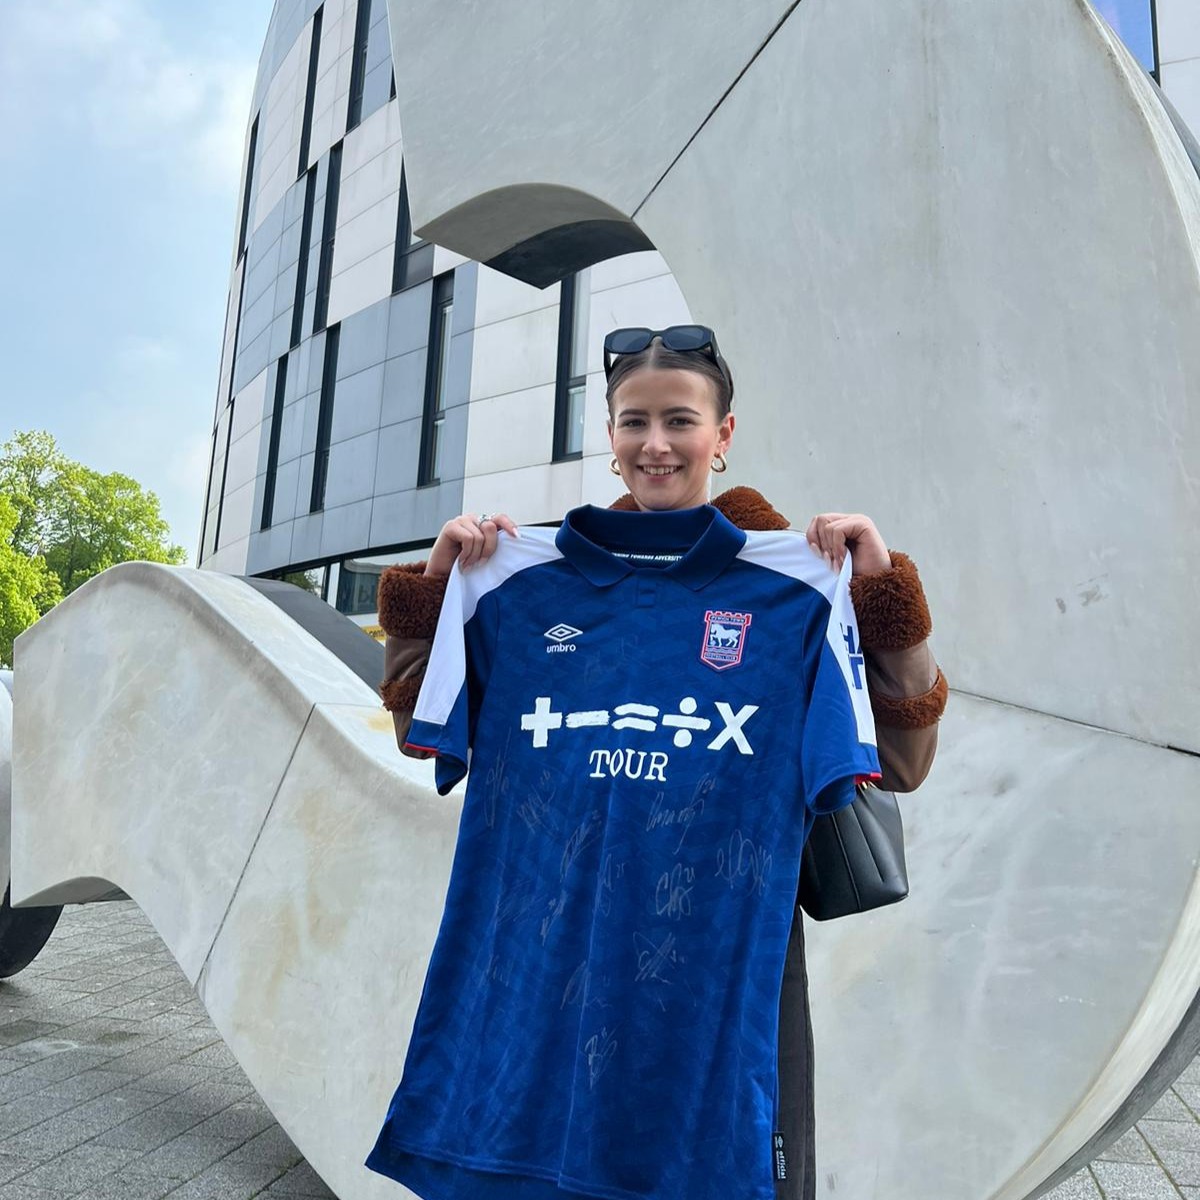 To celebrate a historic season for @IpswichTown, we're giving away a SIGNED 23/24 shirt 🤩⚽ For your chance to win: ➡️ Share a pic of you supporting Ipswich this season ➡️ Use #BlueArmy and tag us (@UniOfSuffolk) T&Cs: bit.ly/3UQEBMp @TWTDuk @IpswichTownFans